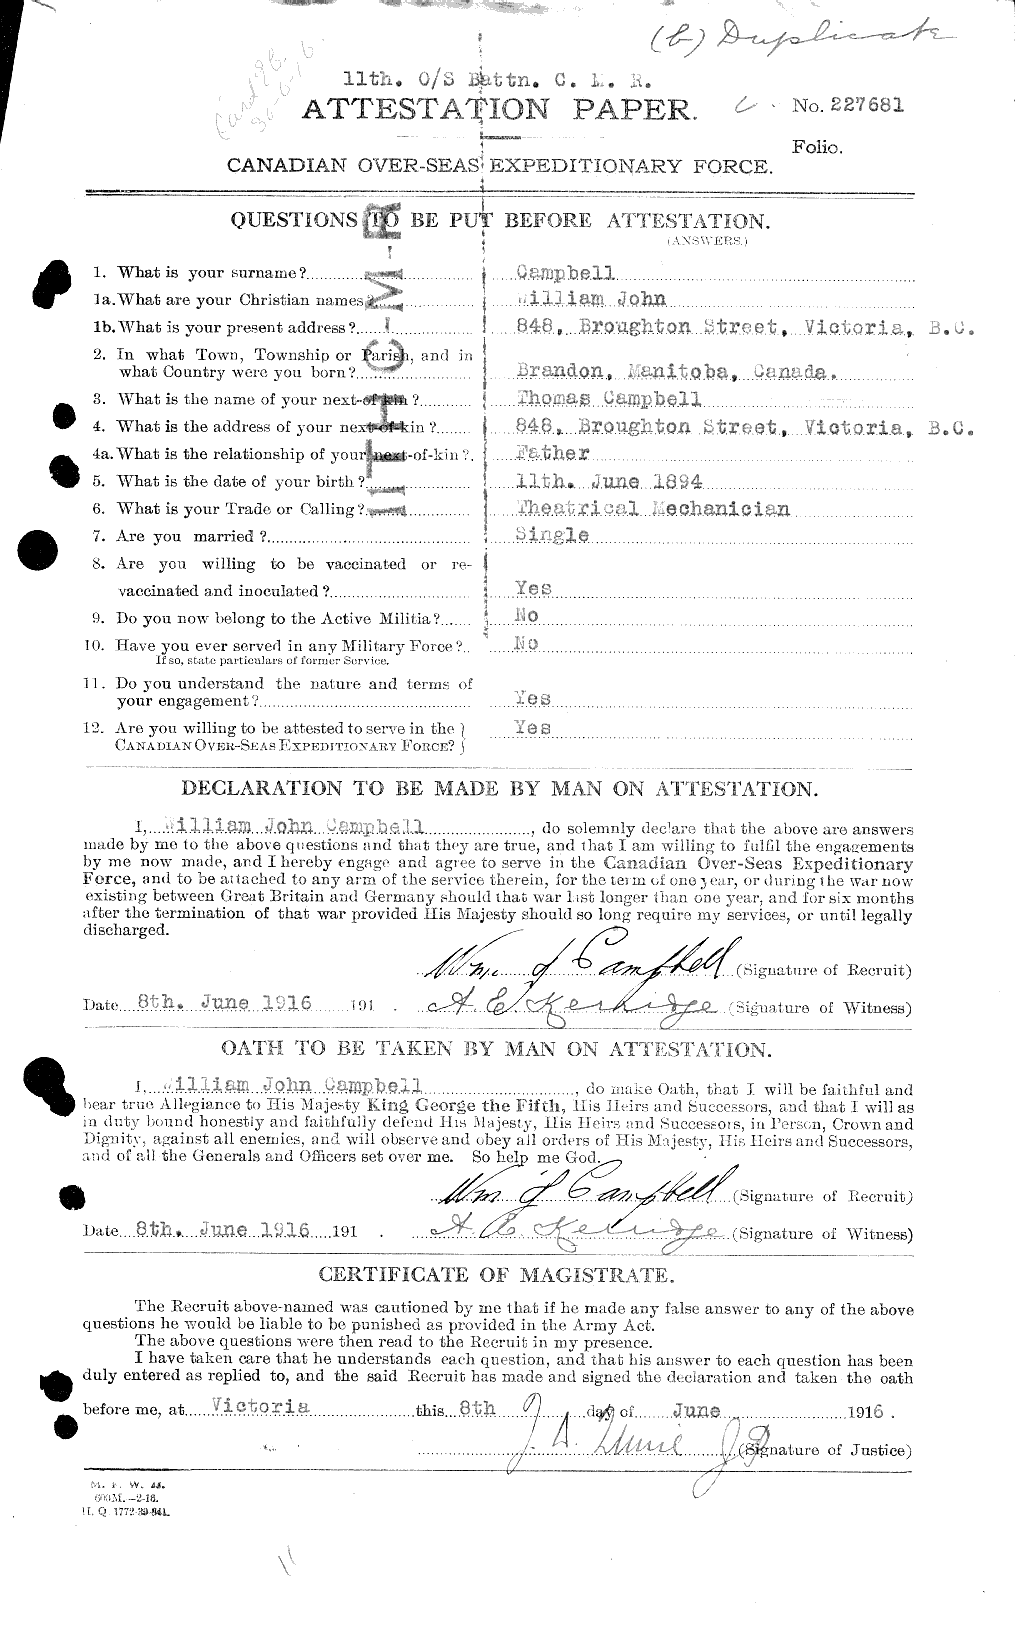 Personnel Records of the First World War - CEF 008698a